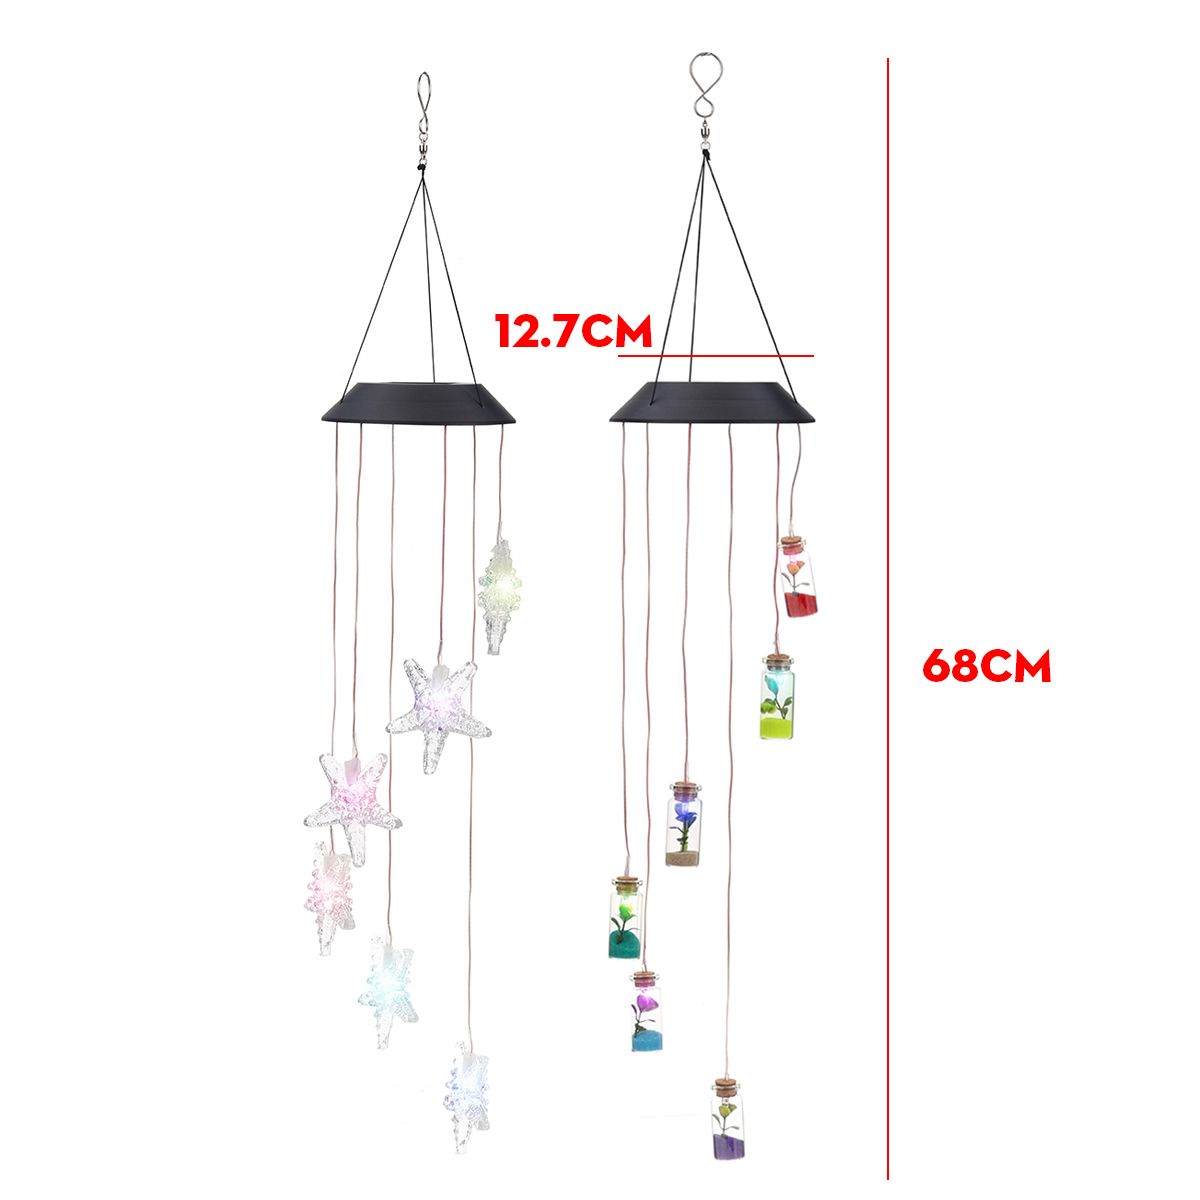 Solar-Powered-LED-Wishing-Bottle-Wind-Chime-Hanging-Light-Color-Changing-Lamp-Garden-Decor-Room-1693039